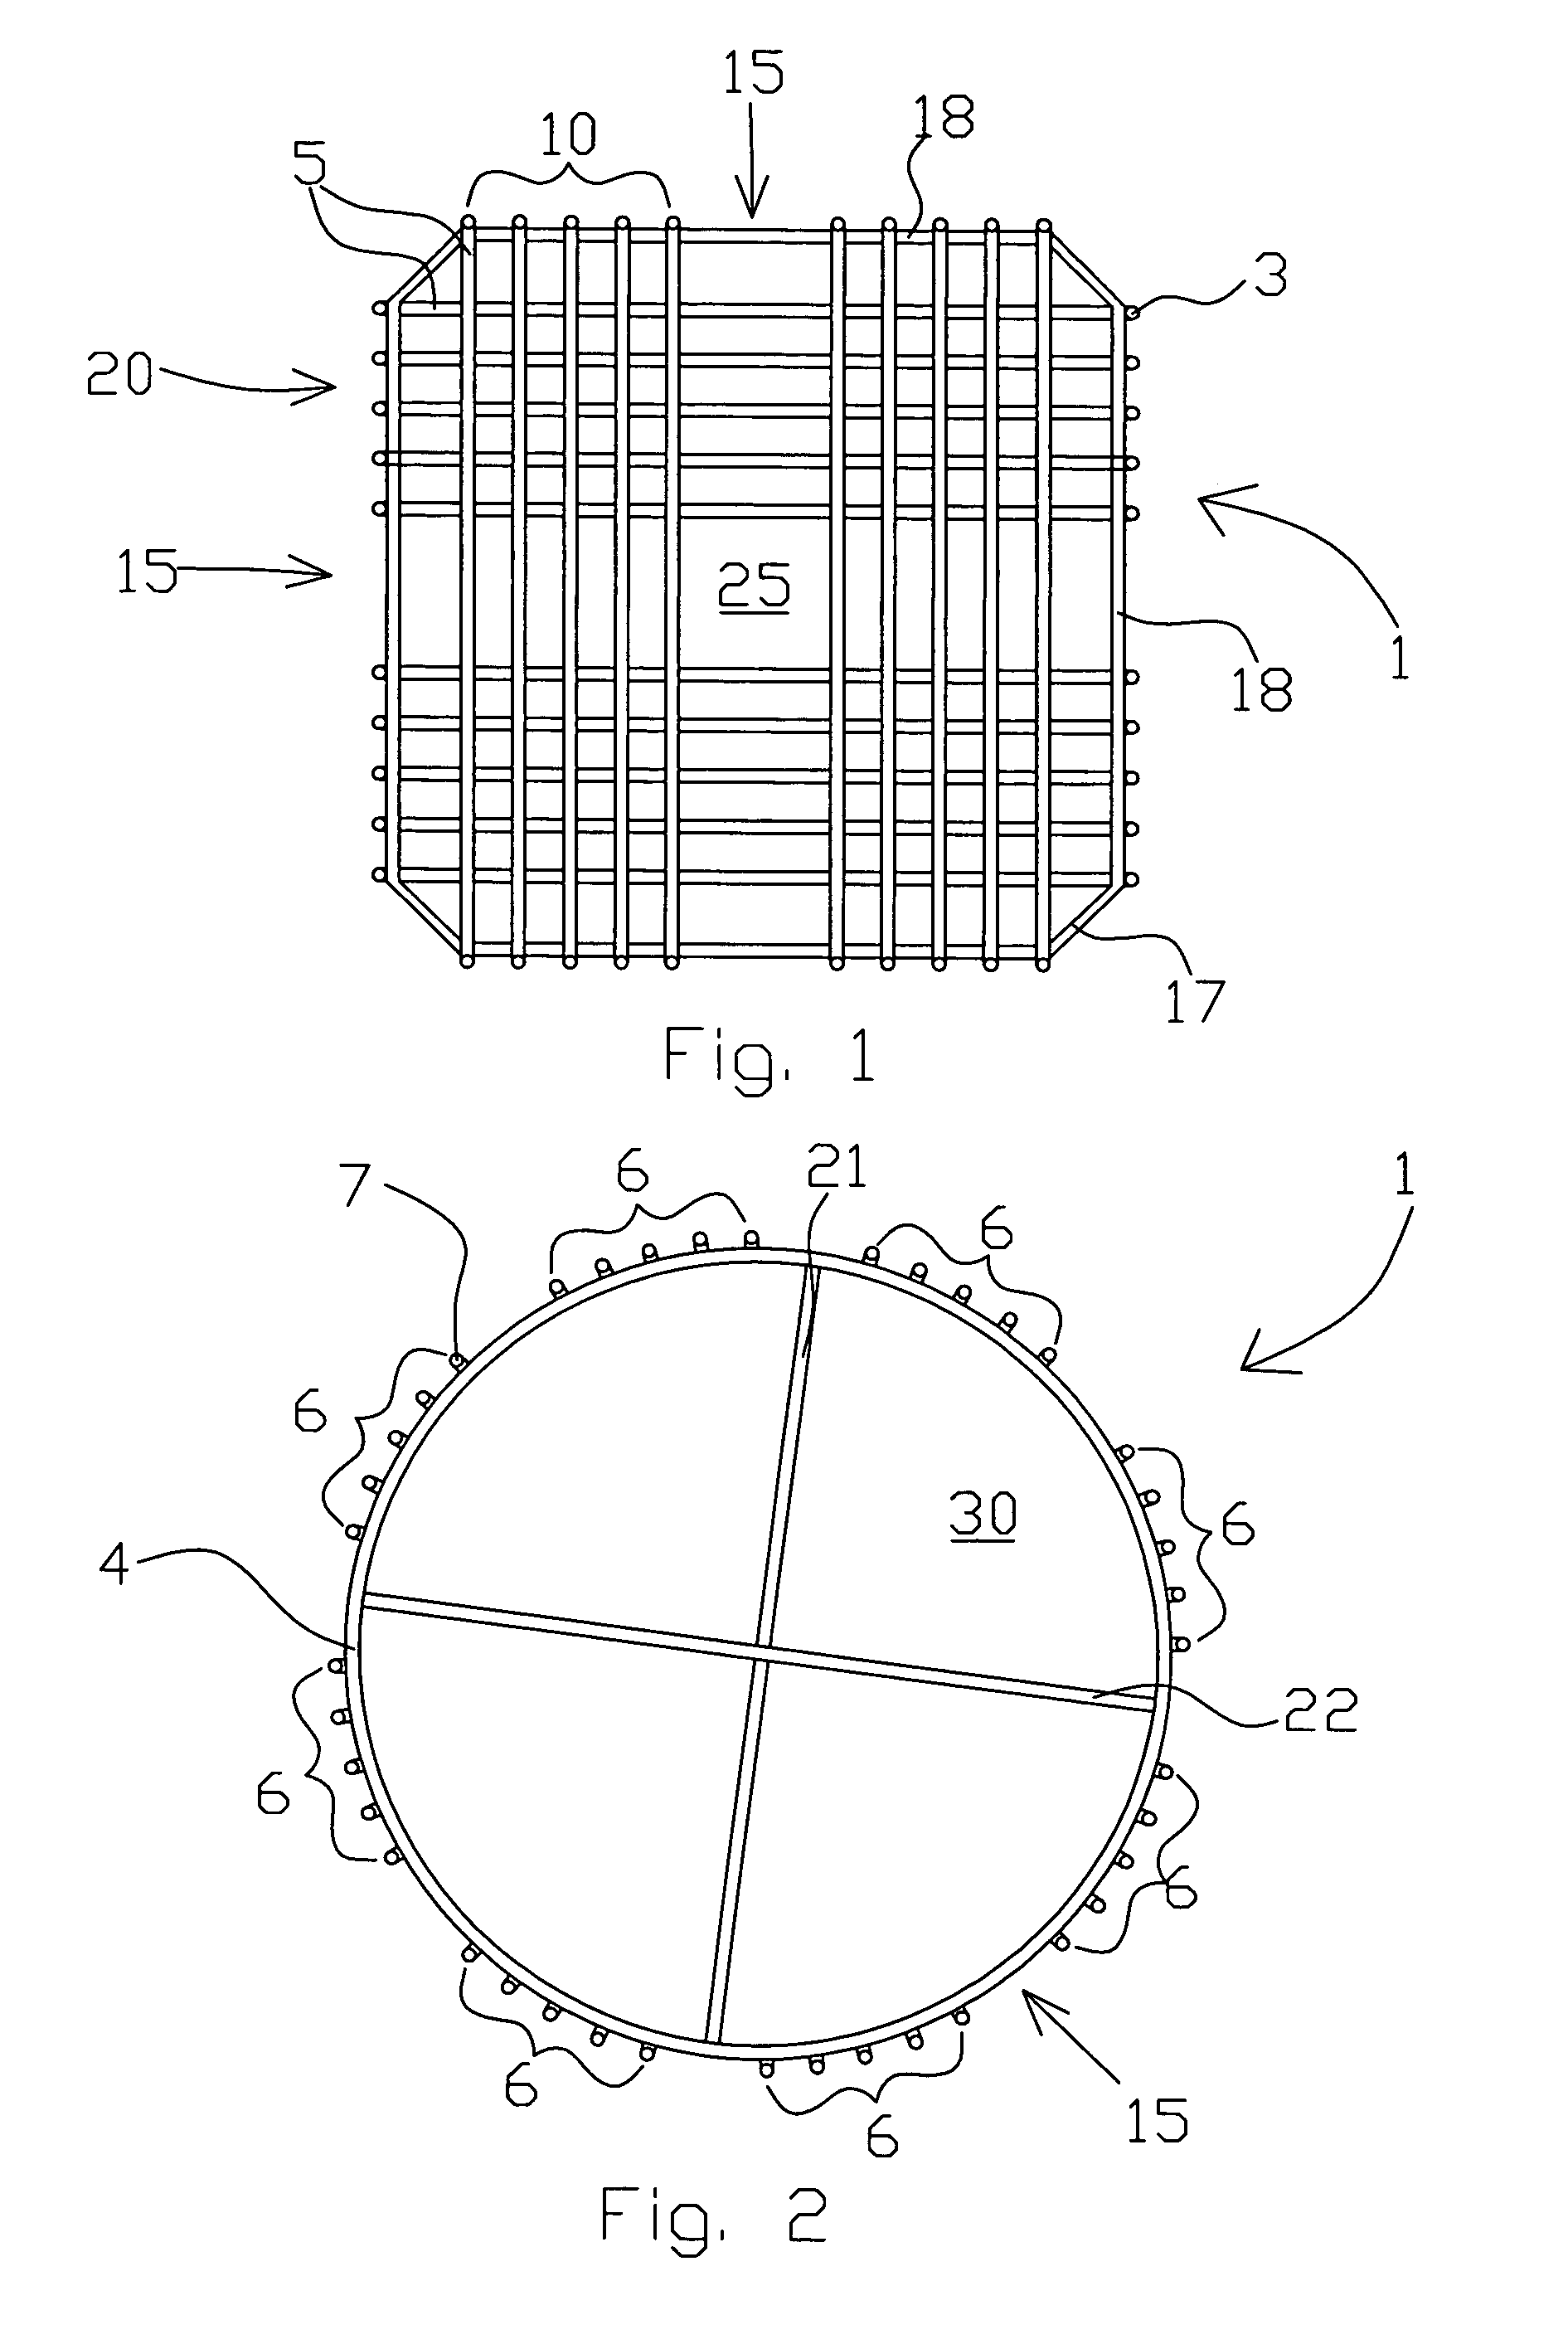 Surgical sponge counting device and method